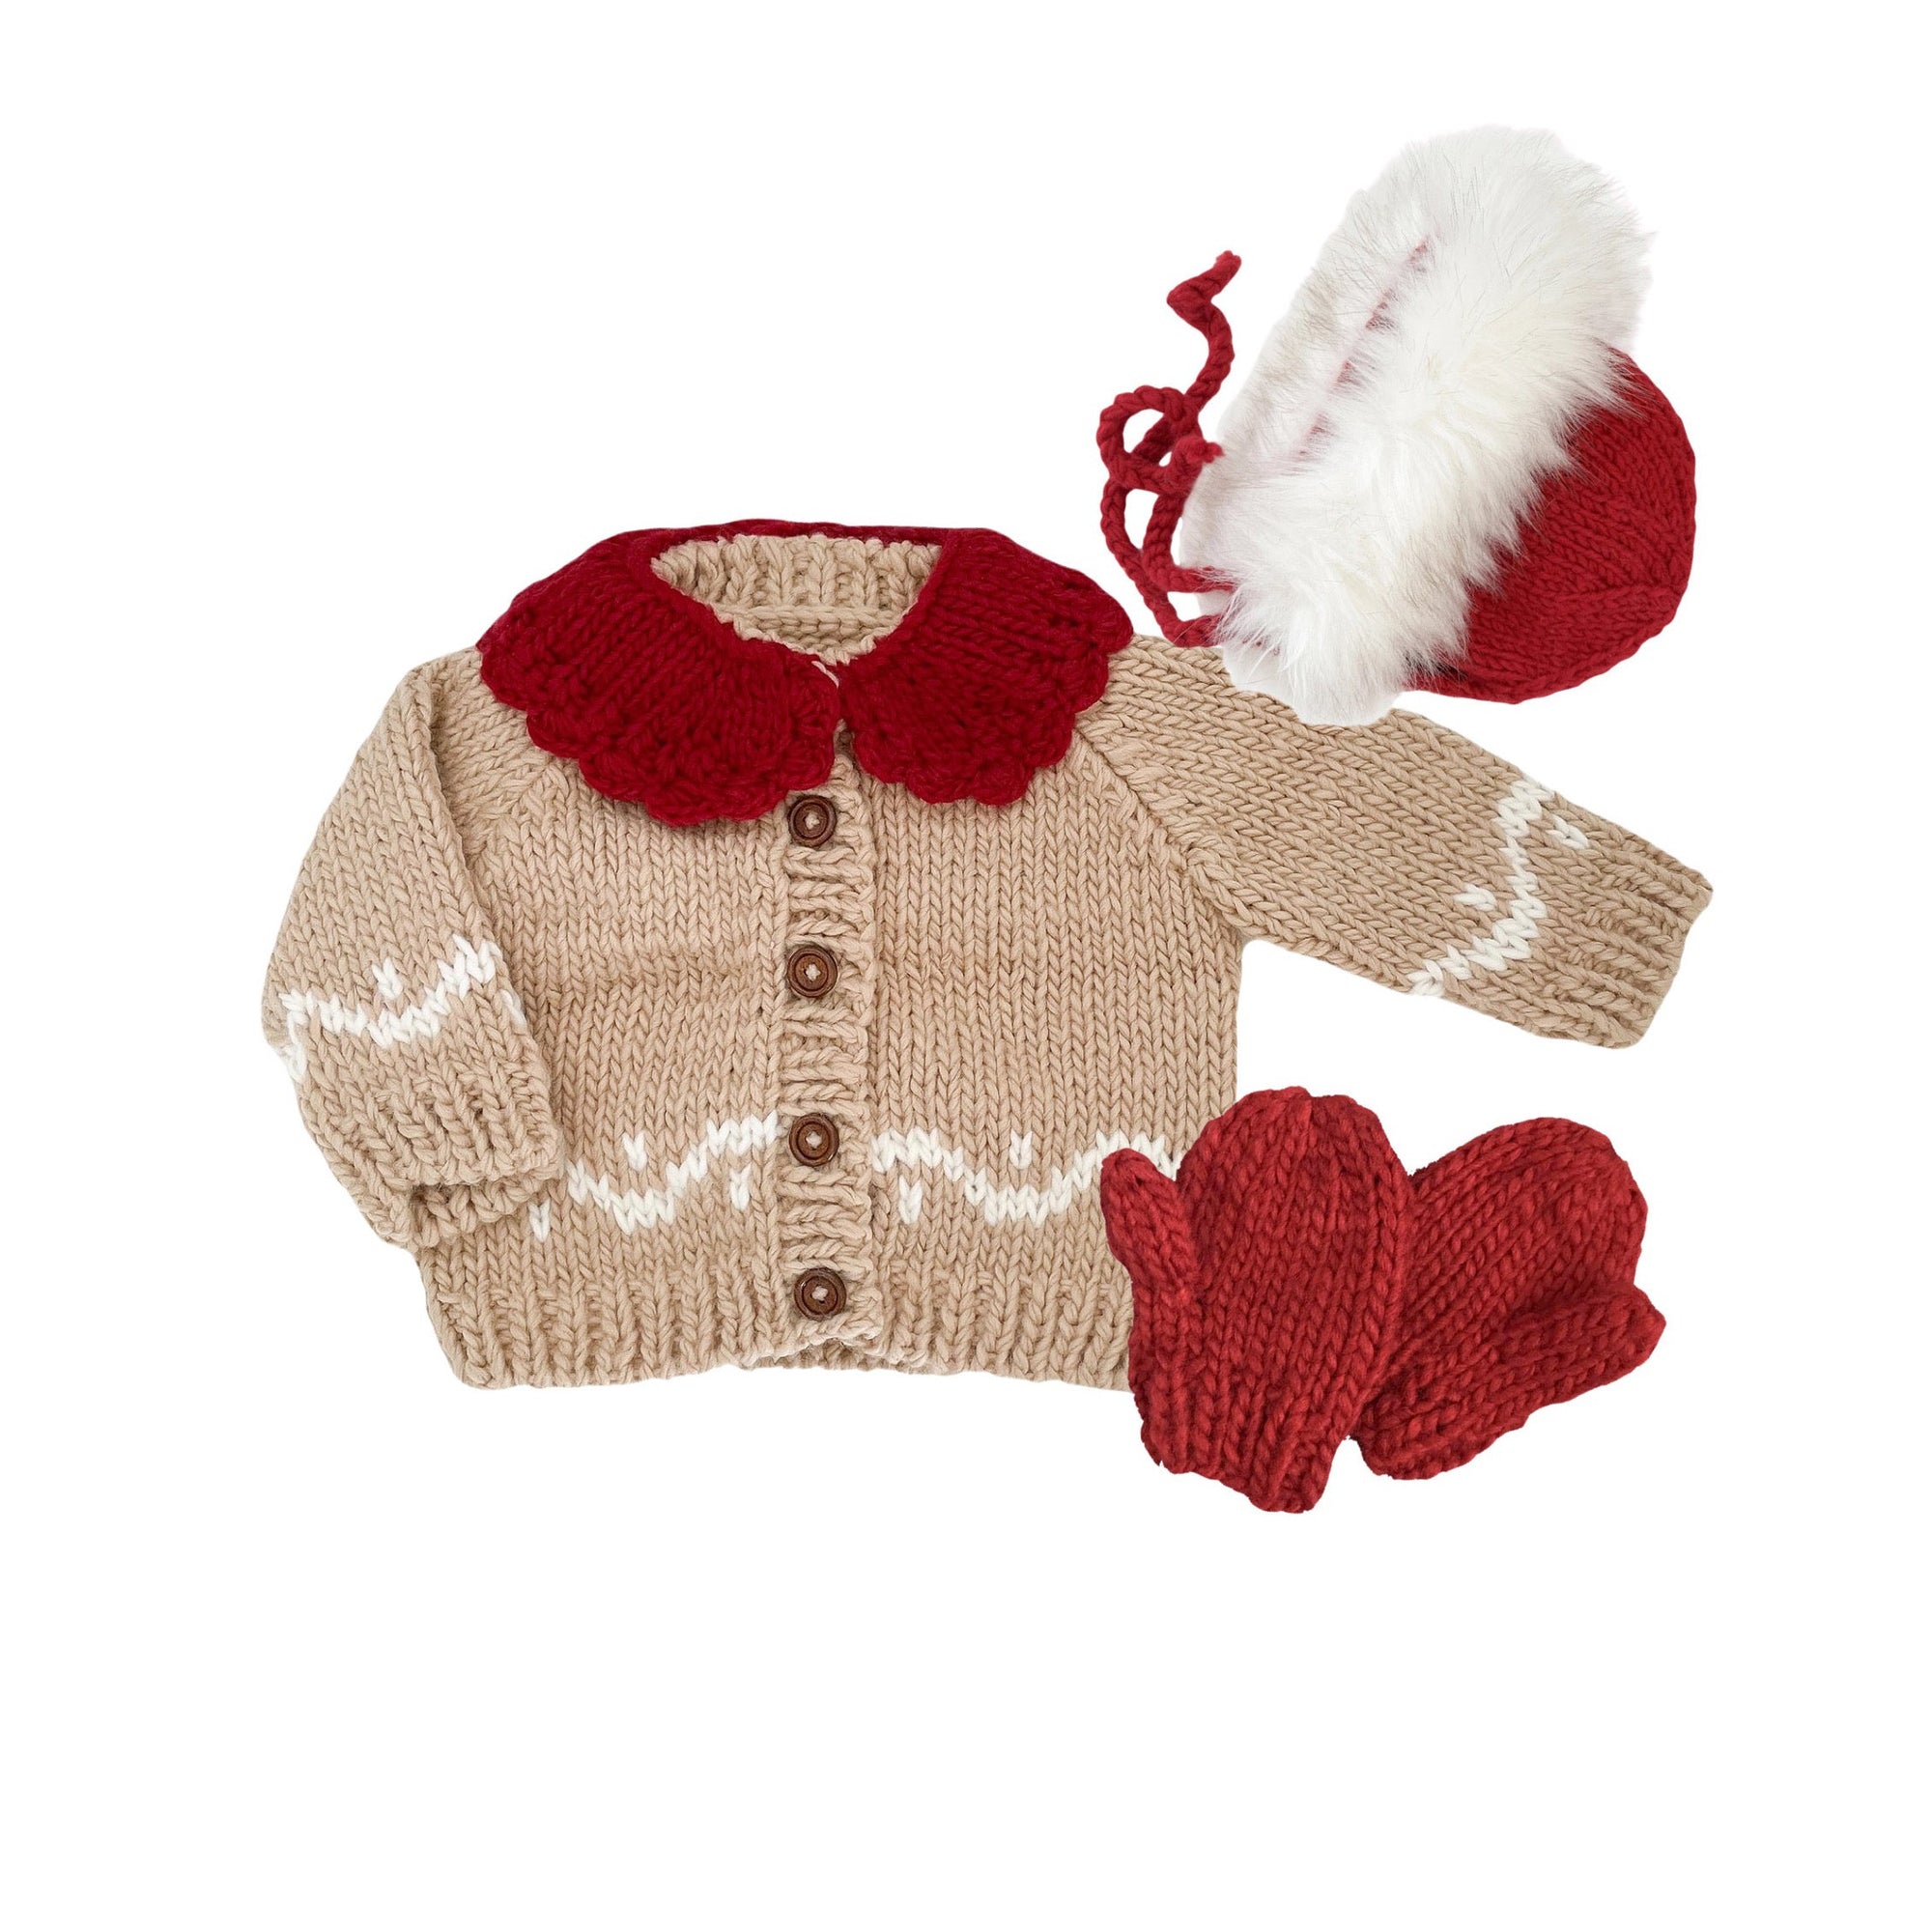 Gingerbread Hand Knit Cardigan Sweater